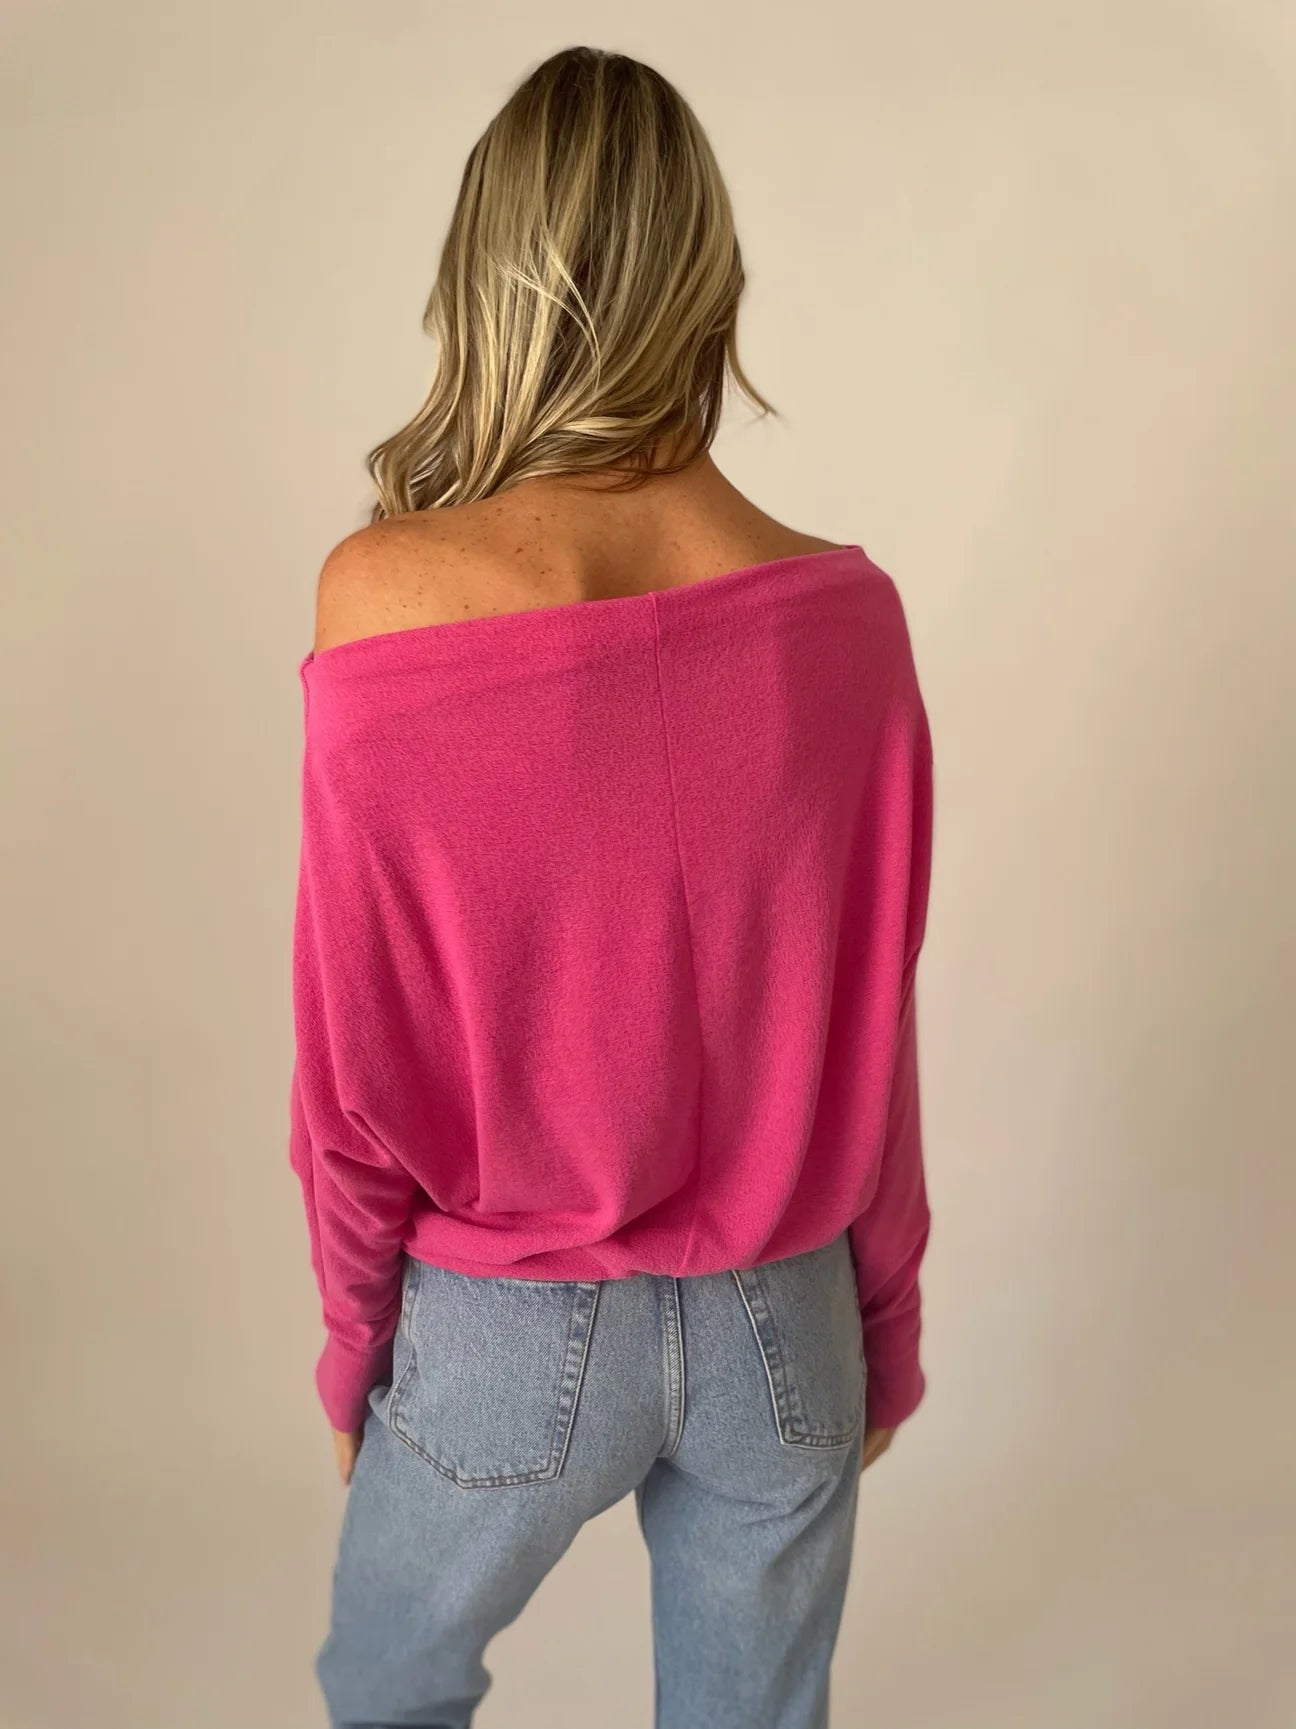 The anywhere punch pink top